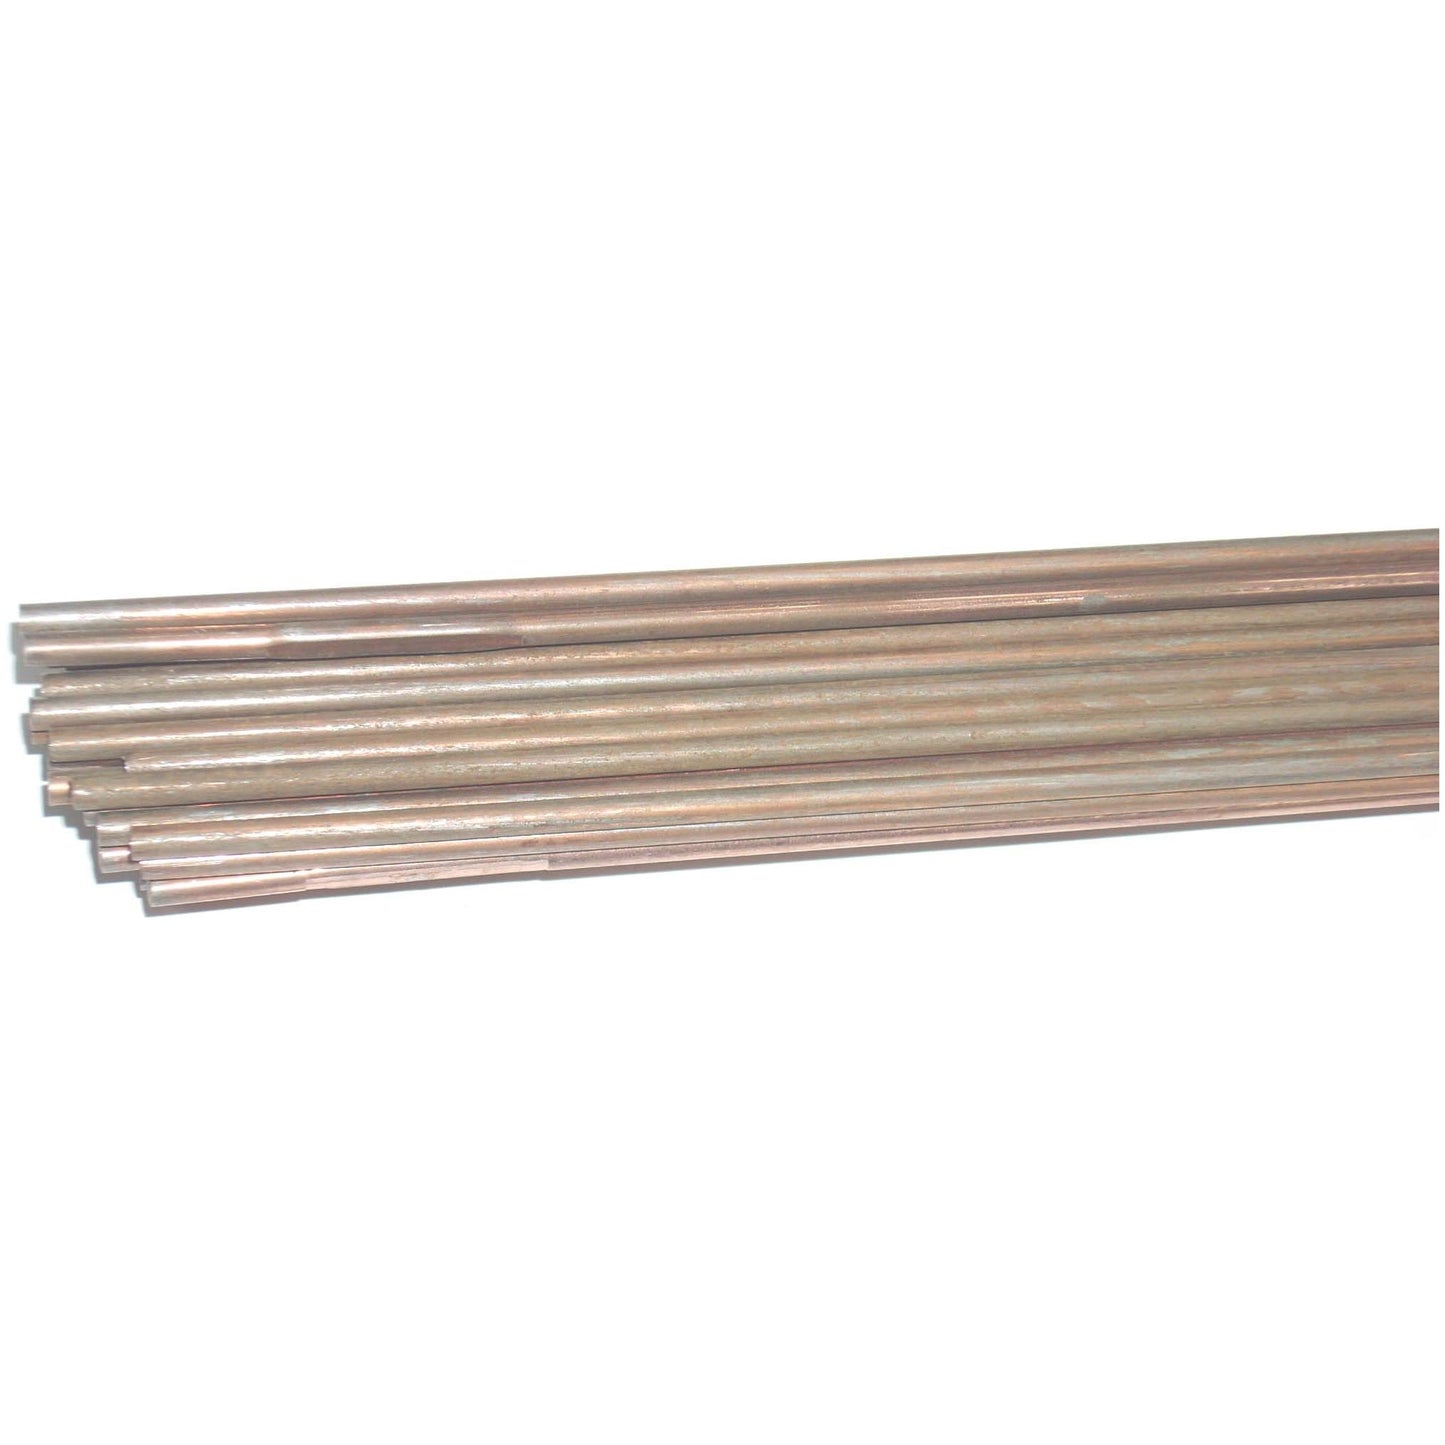 Forney R45 Copper Coated Brazing Rods 1/8 x 36 Some Surface Rust - 5 lb